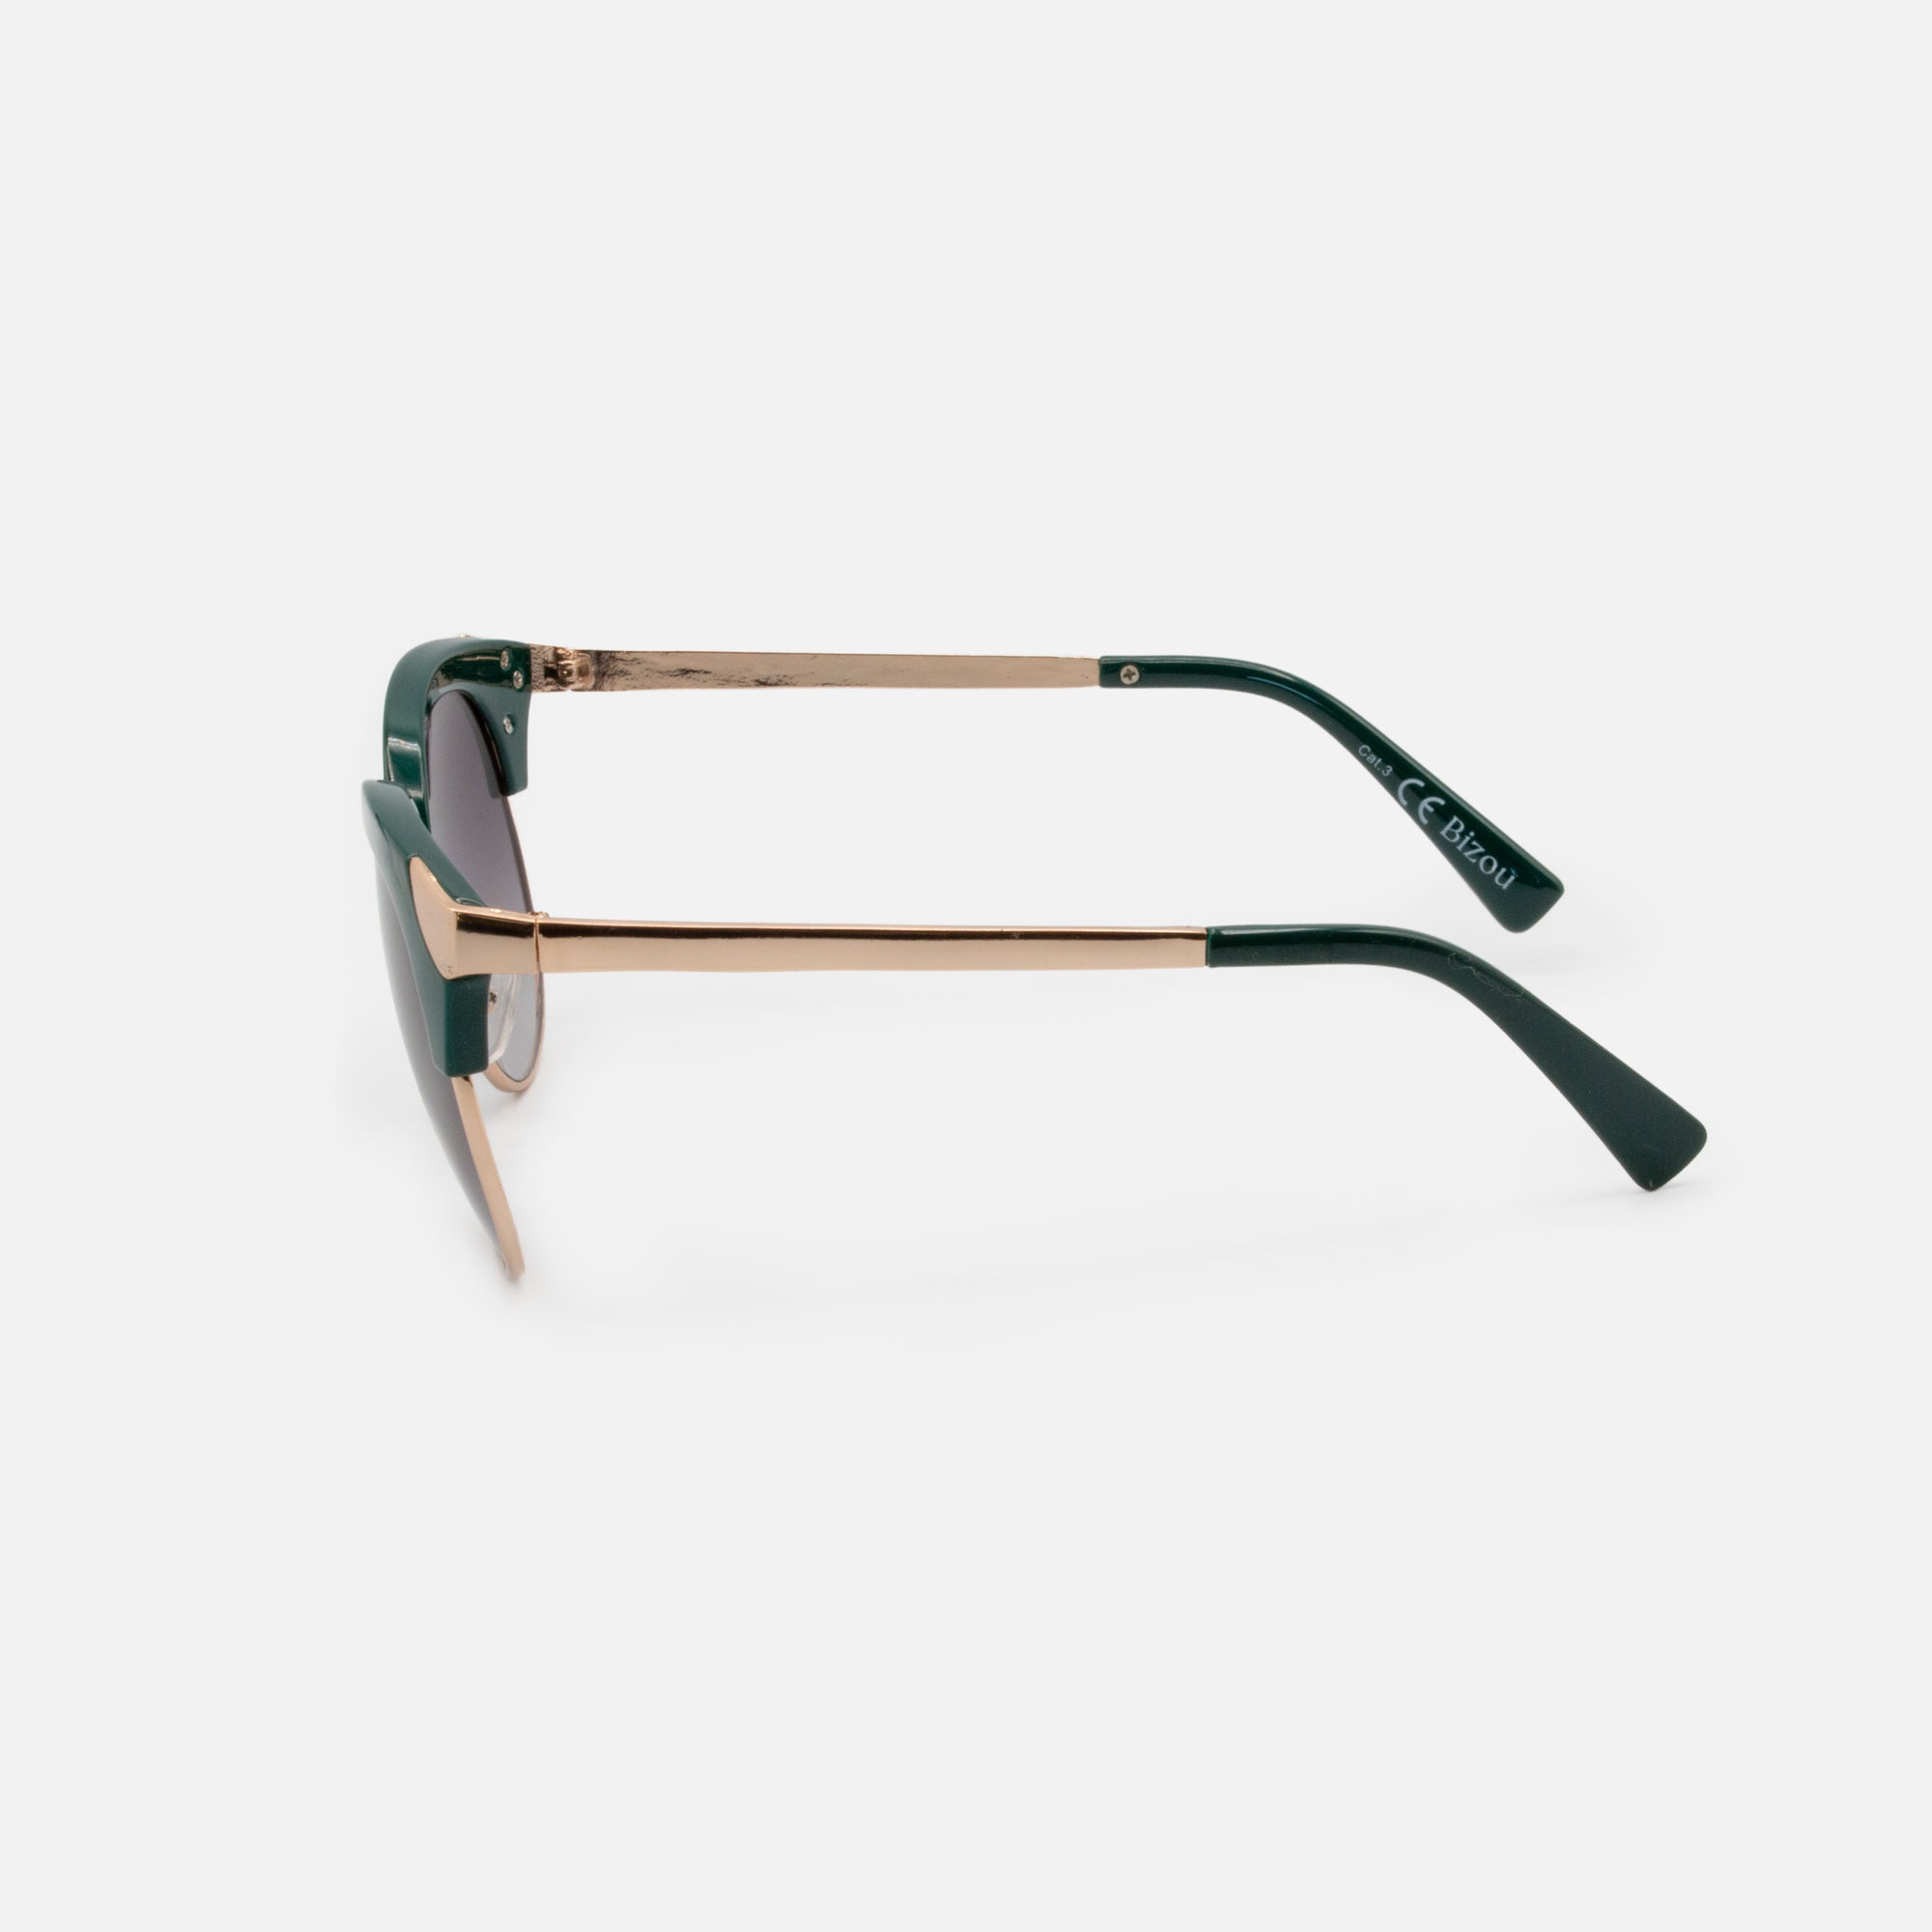 Cat-eye sunglasses with gold and forest green frames